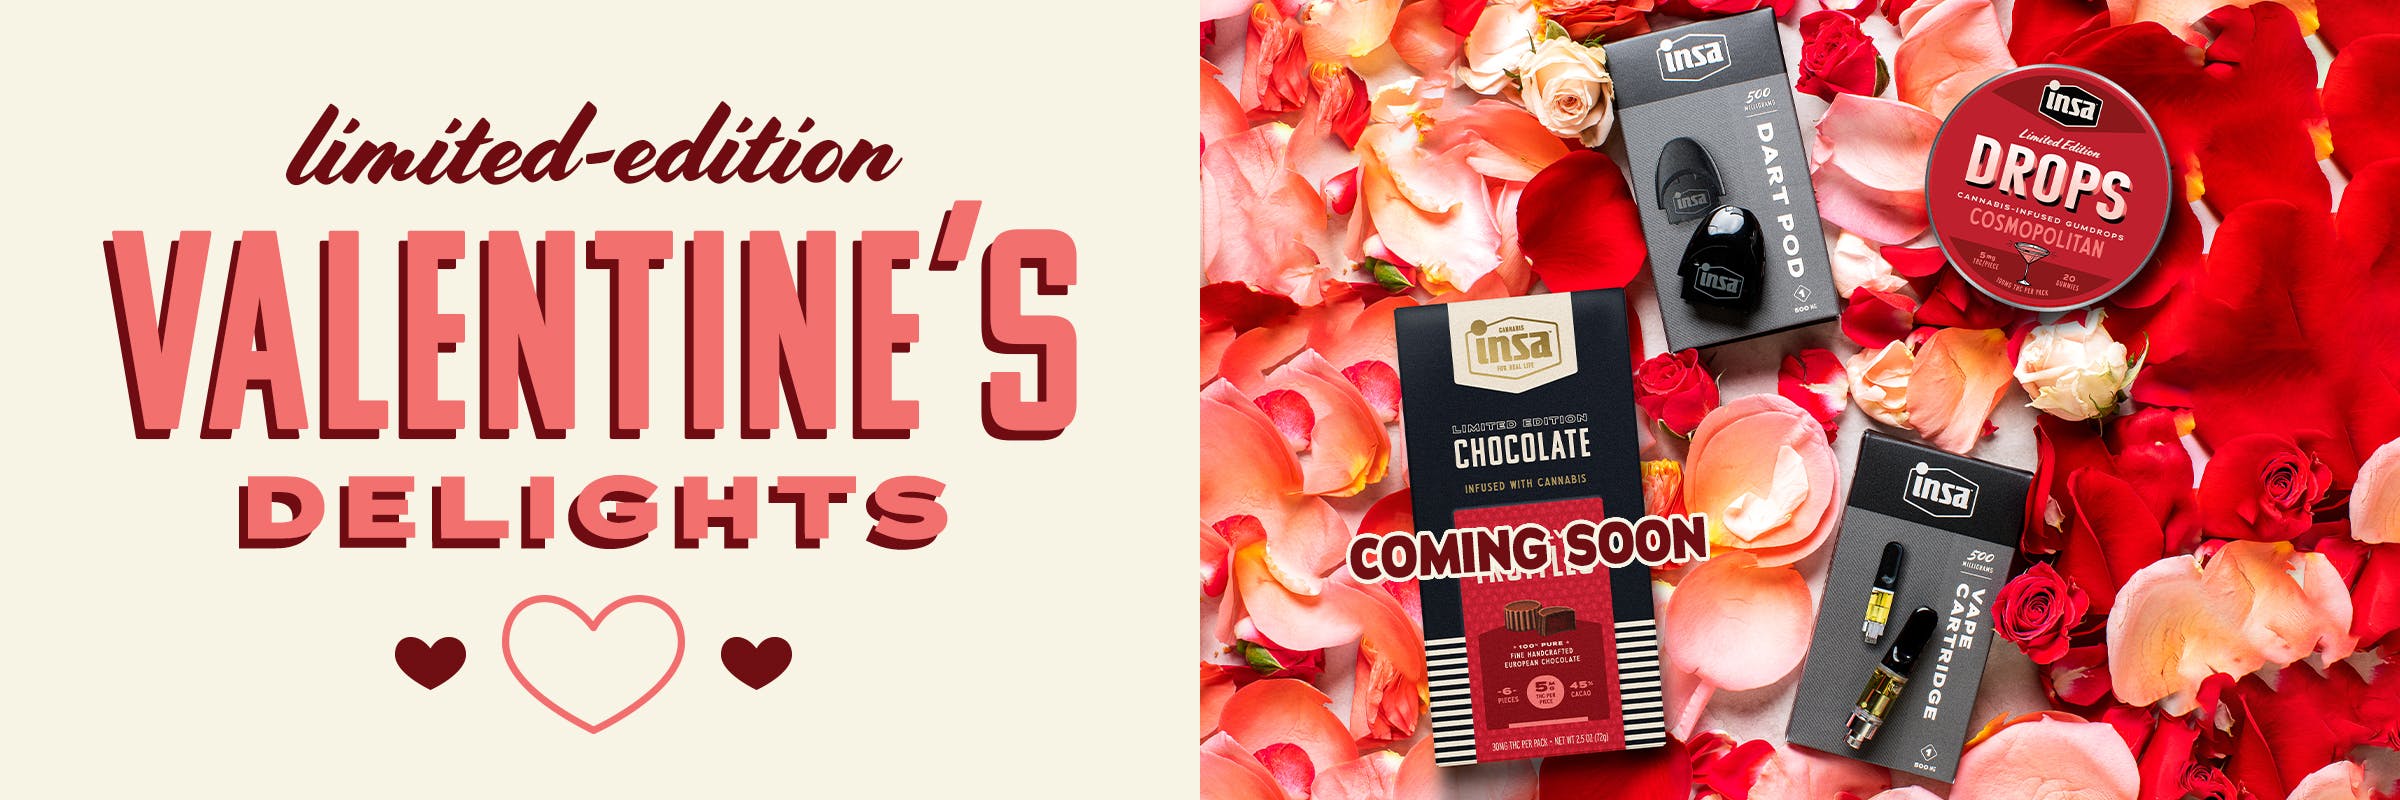 Limited Edition Valentine's Delights